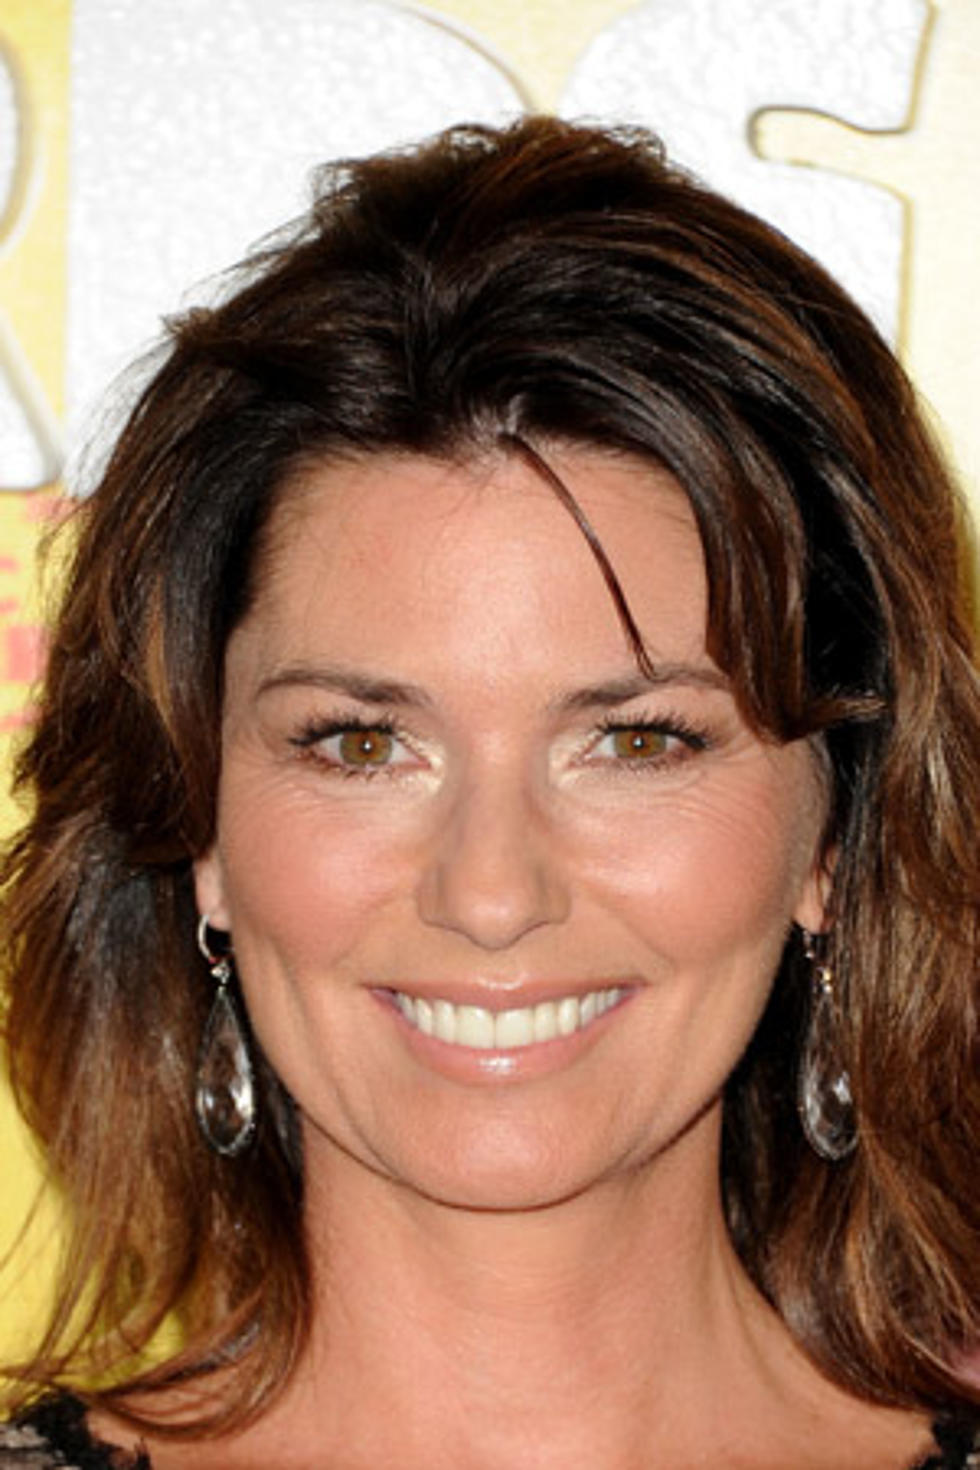 Shania Twain Stalker Lashes Out at Court